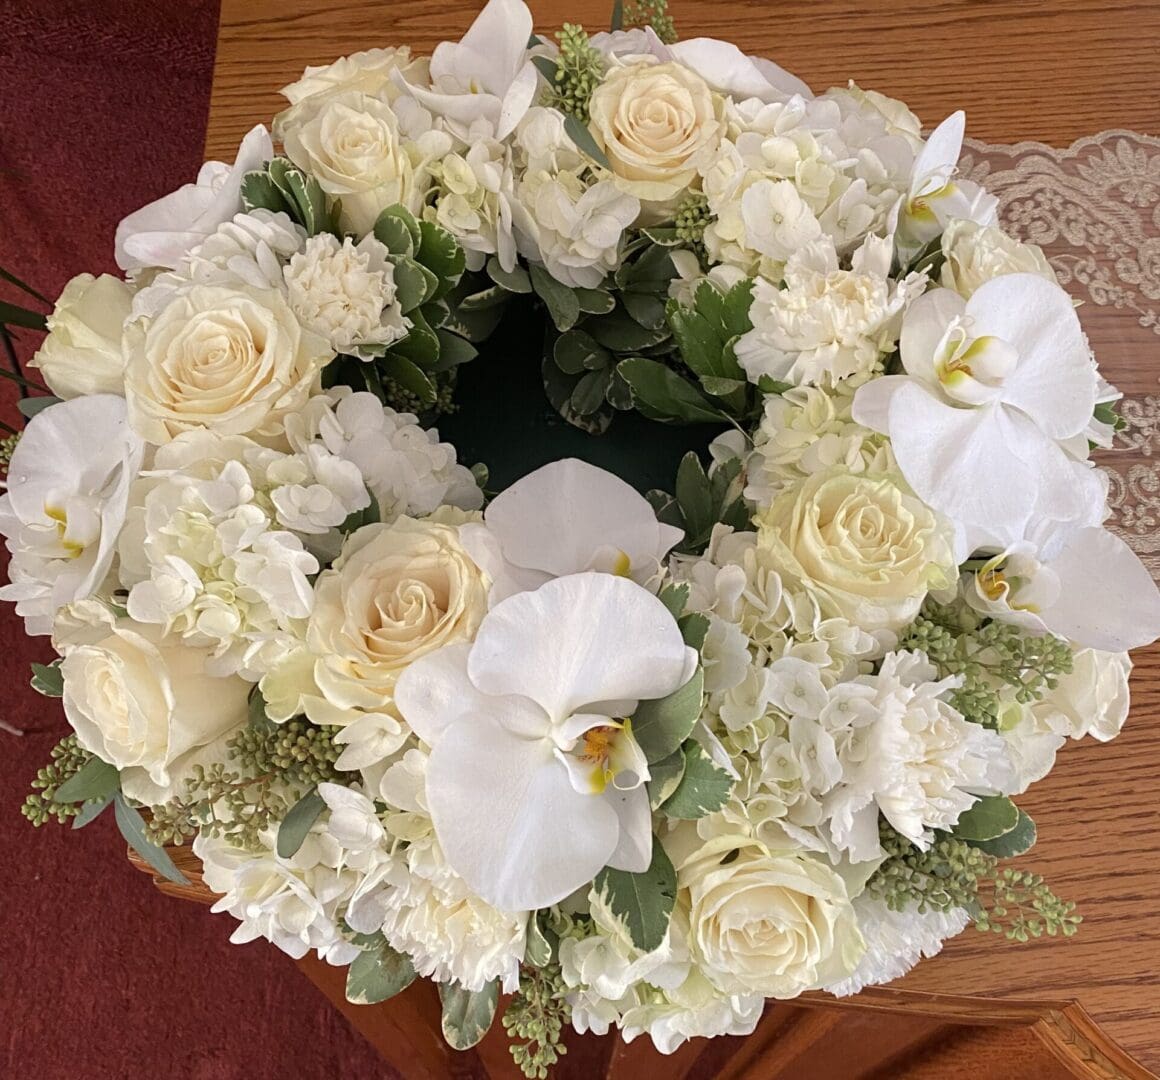 A bundle of various white flowers